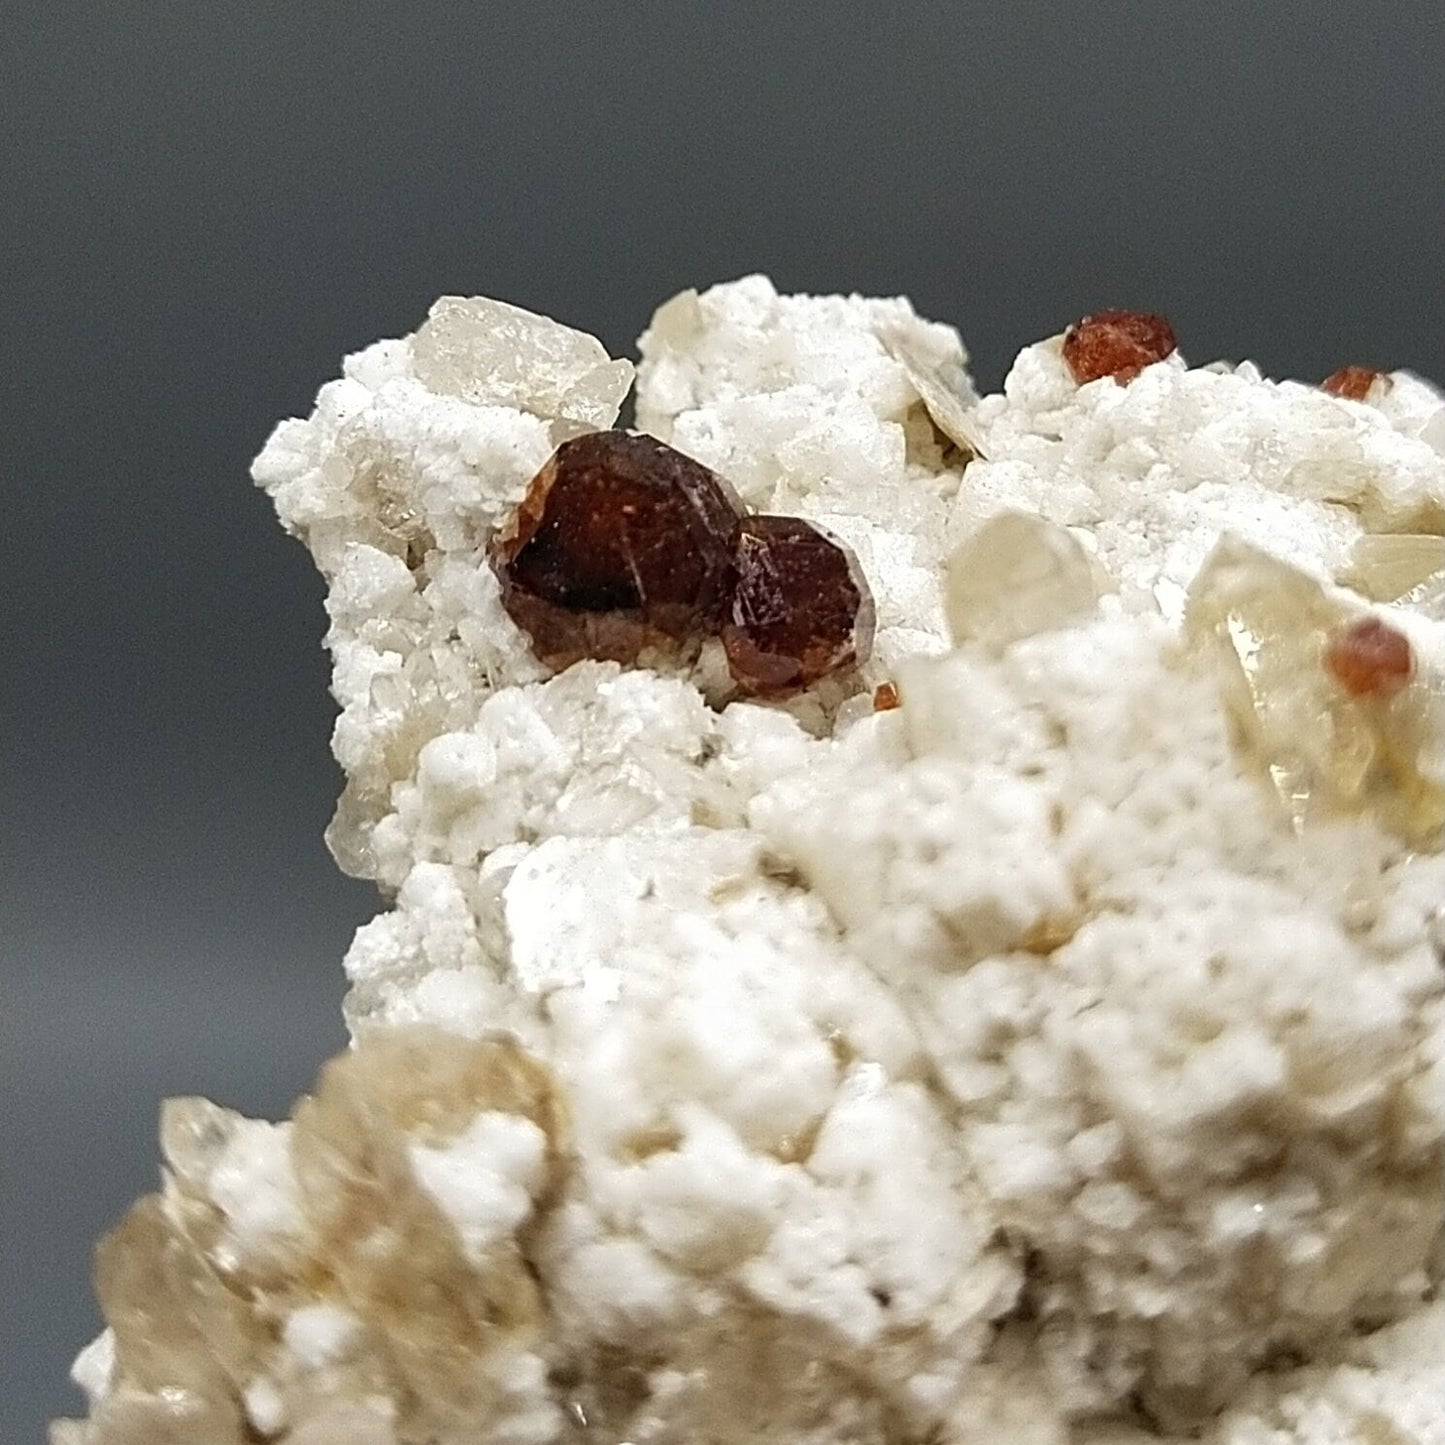 ARSAA GEMS AND MINERALSNatural an aesthetic clear quartz crystal on matrix with terminated red spessartine garnet alongside with albite and muscovite from Pakistan - Premium  from ARSAA GEMS AND MINERALS - Just $80.00! Shop now at ARSAA GEMS AND MINERALS